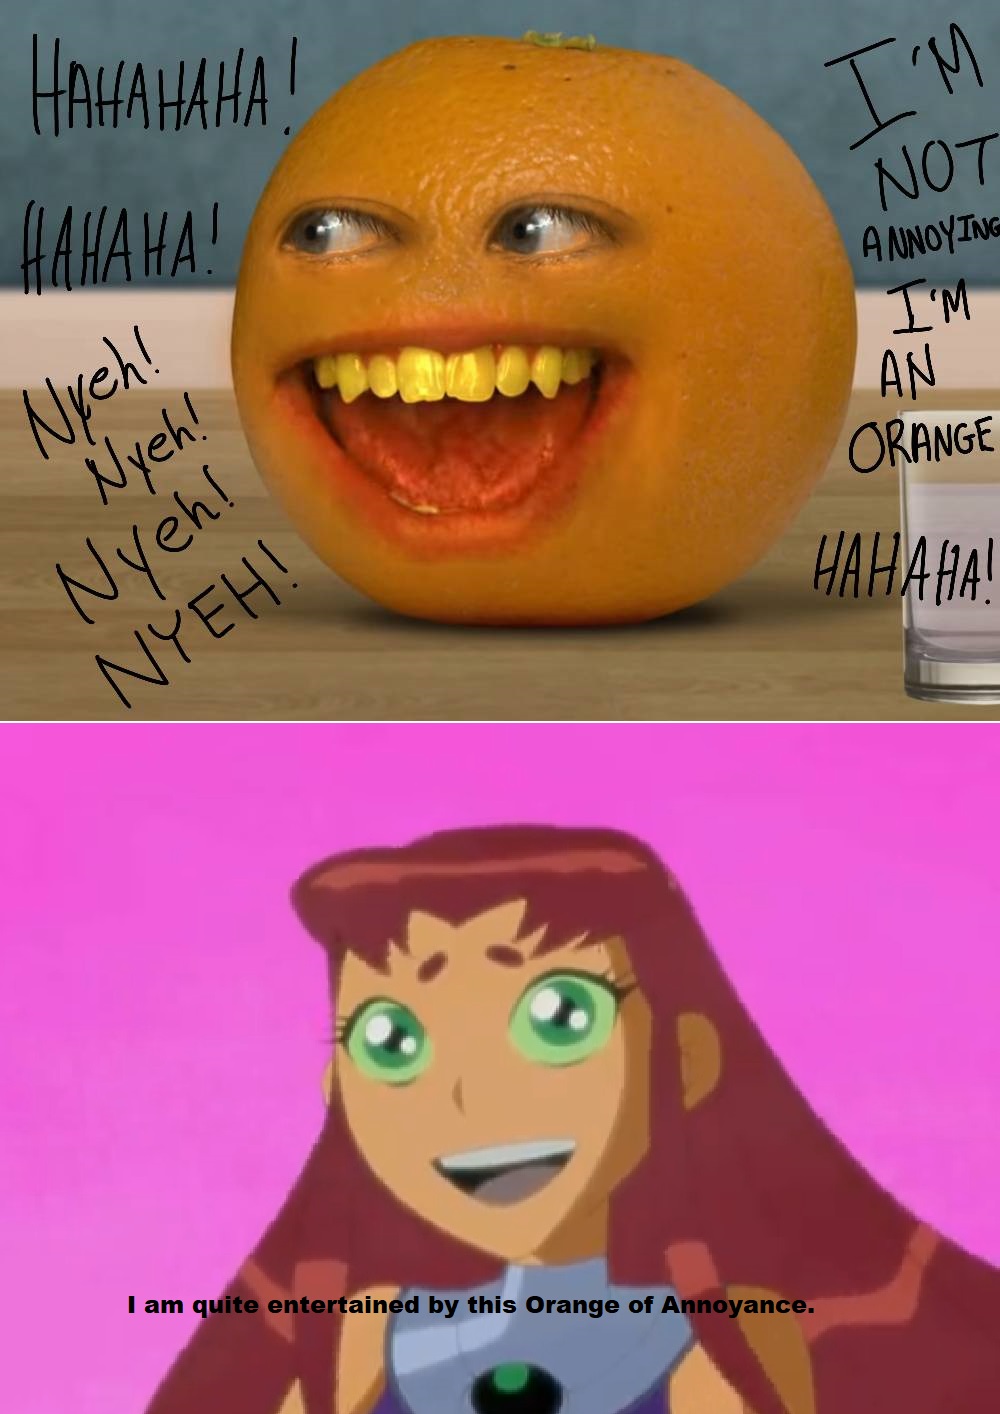 Starfire Finds The Annoying Orange Funny by JCFanfics on DeviantArt